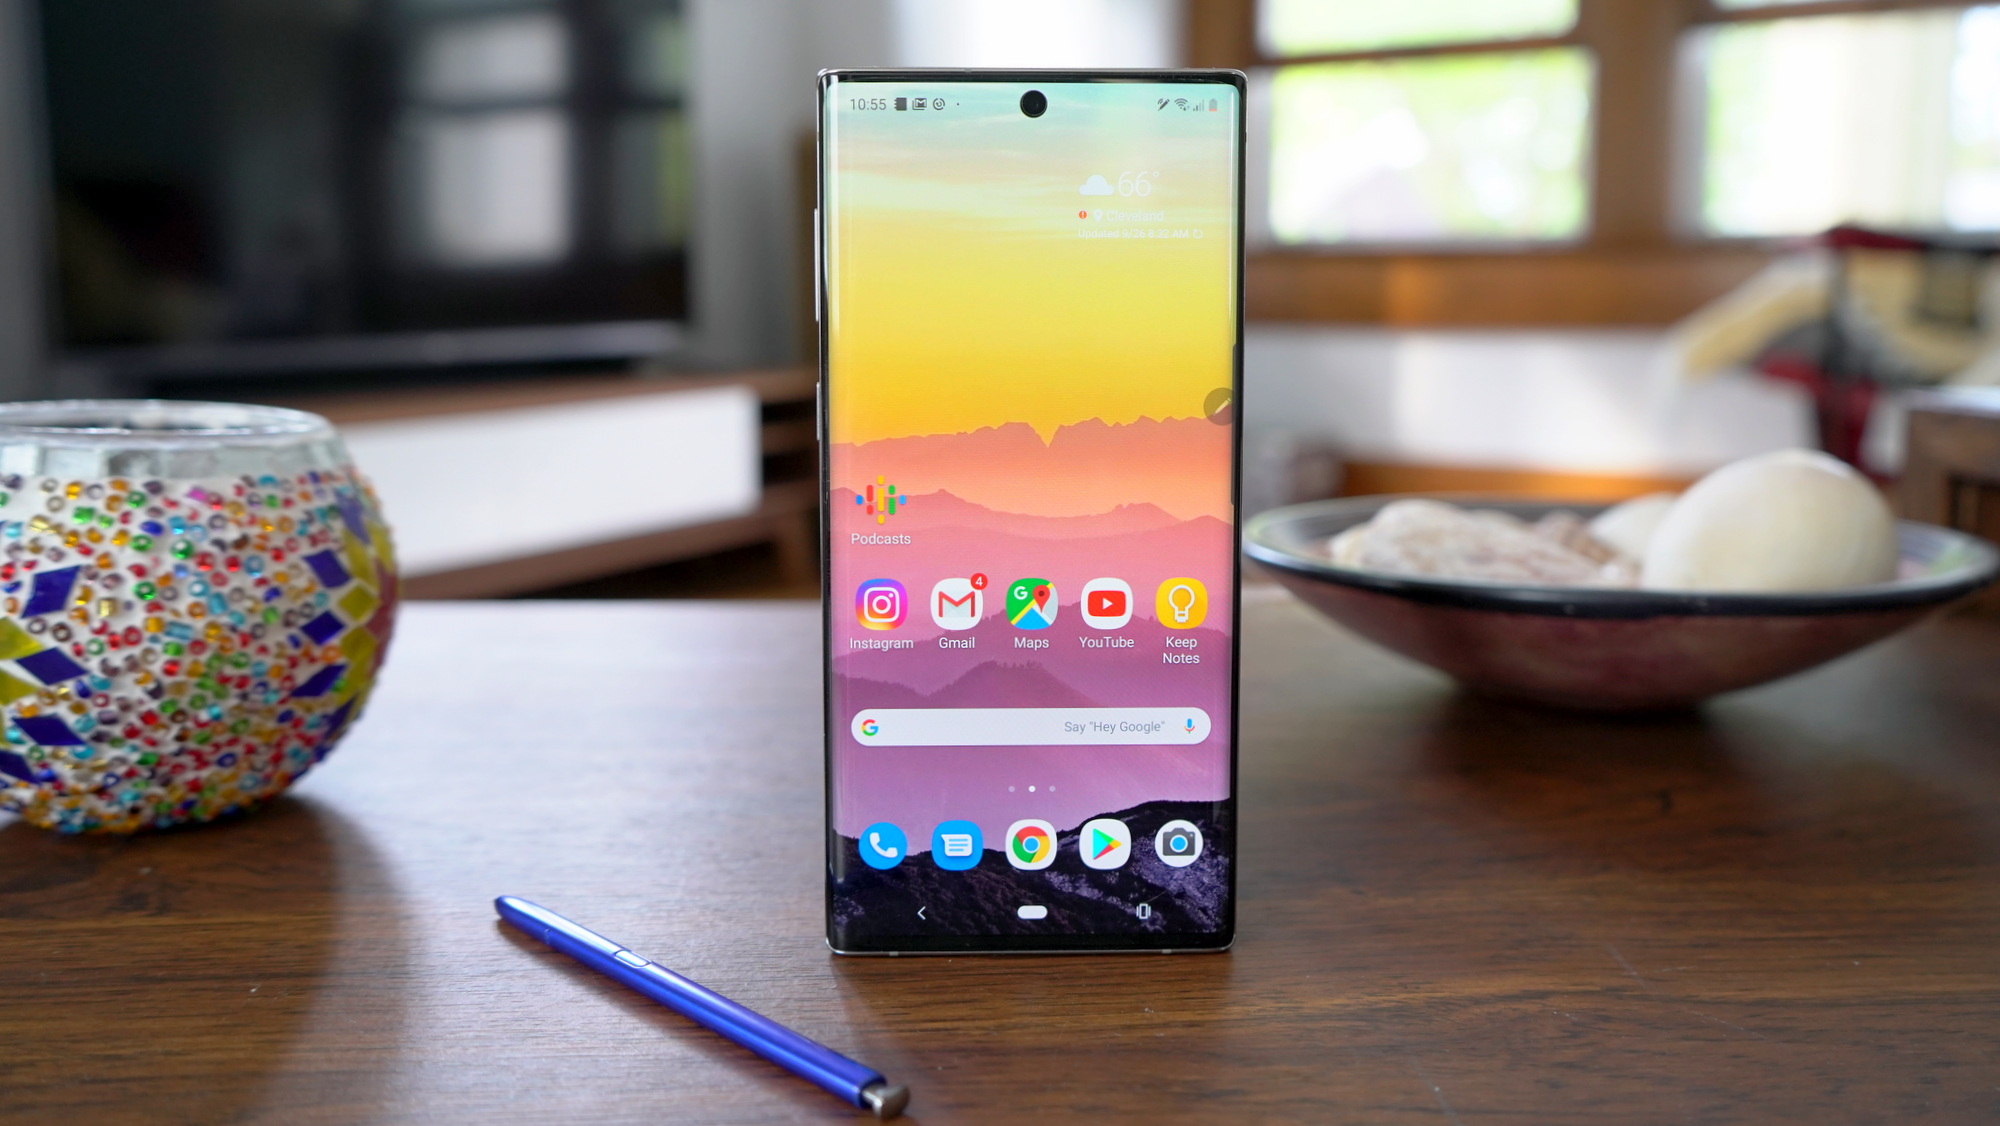 samsung galaxy note 10 11 - Samsung Galaxy Note 10 price in Nigeria and full specs